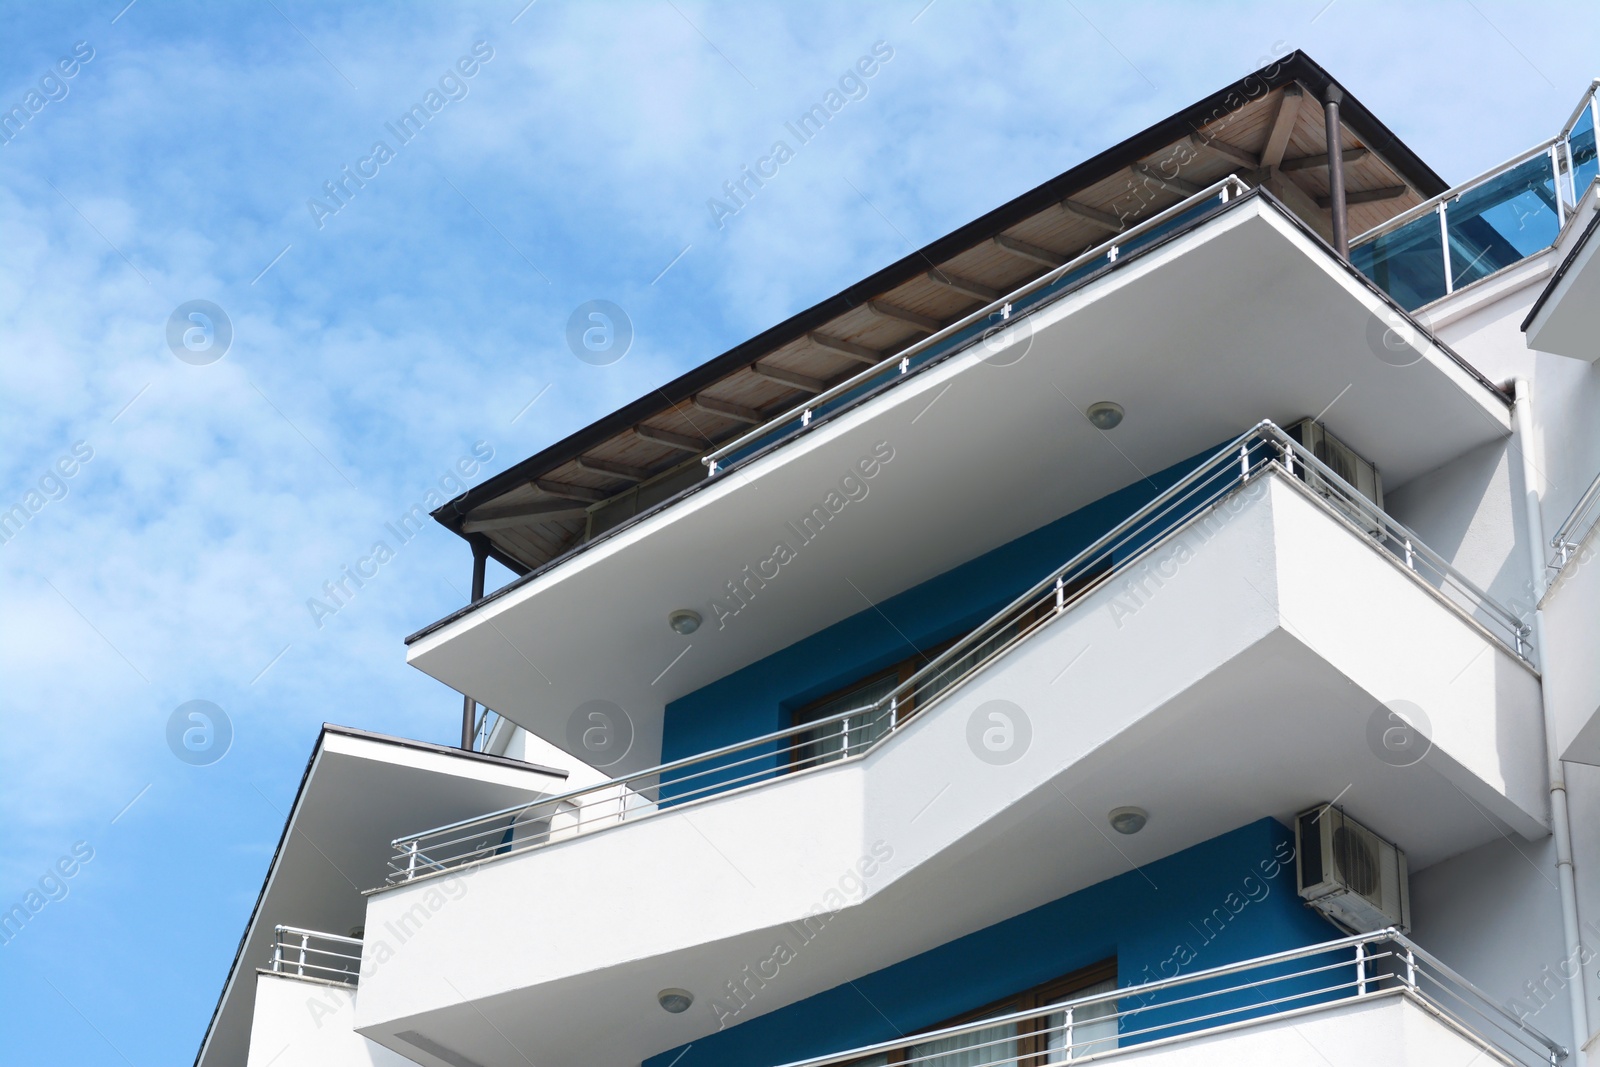 Photo of Exterior of beautiful building with balconies against blue sky, low angle view